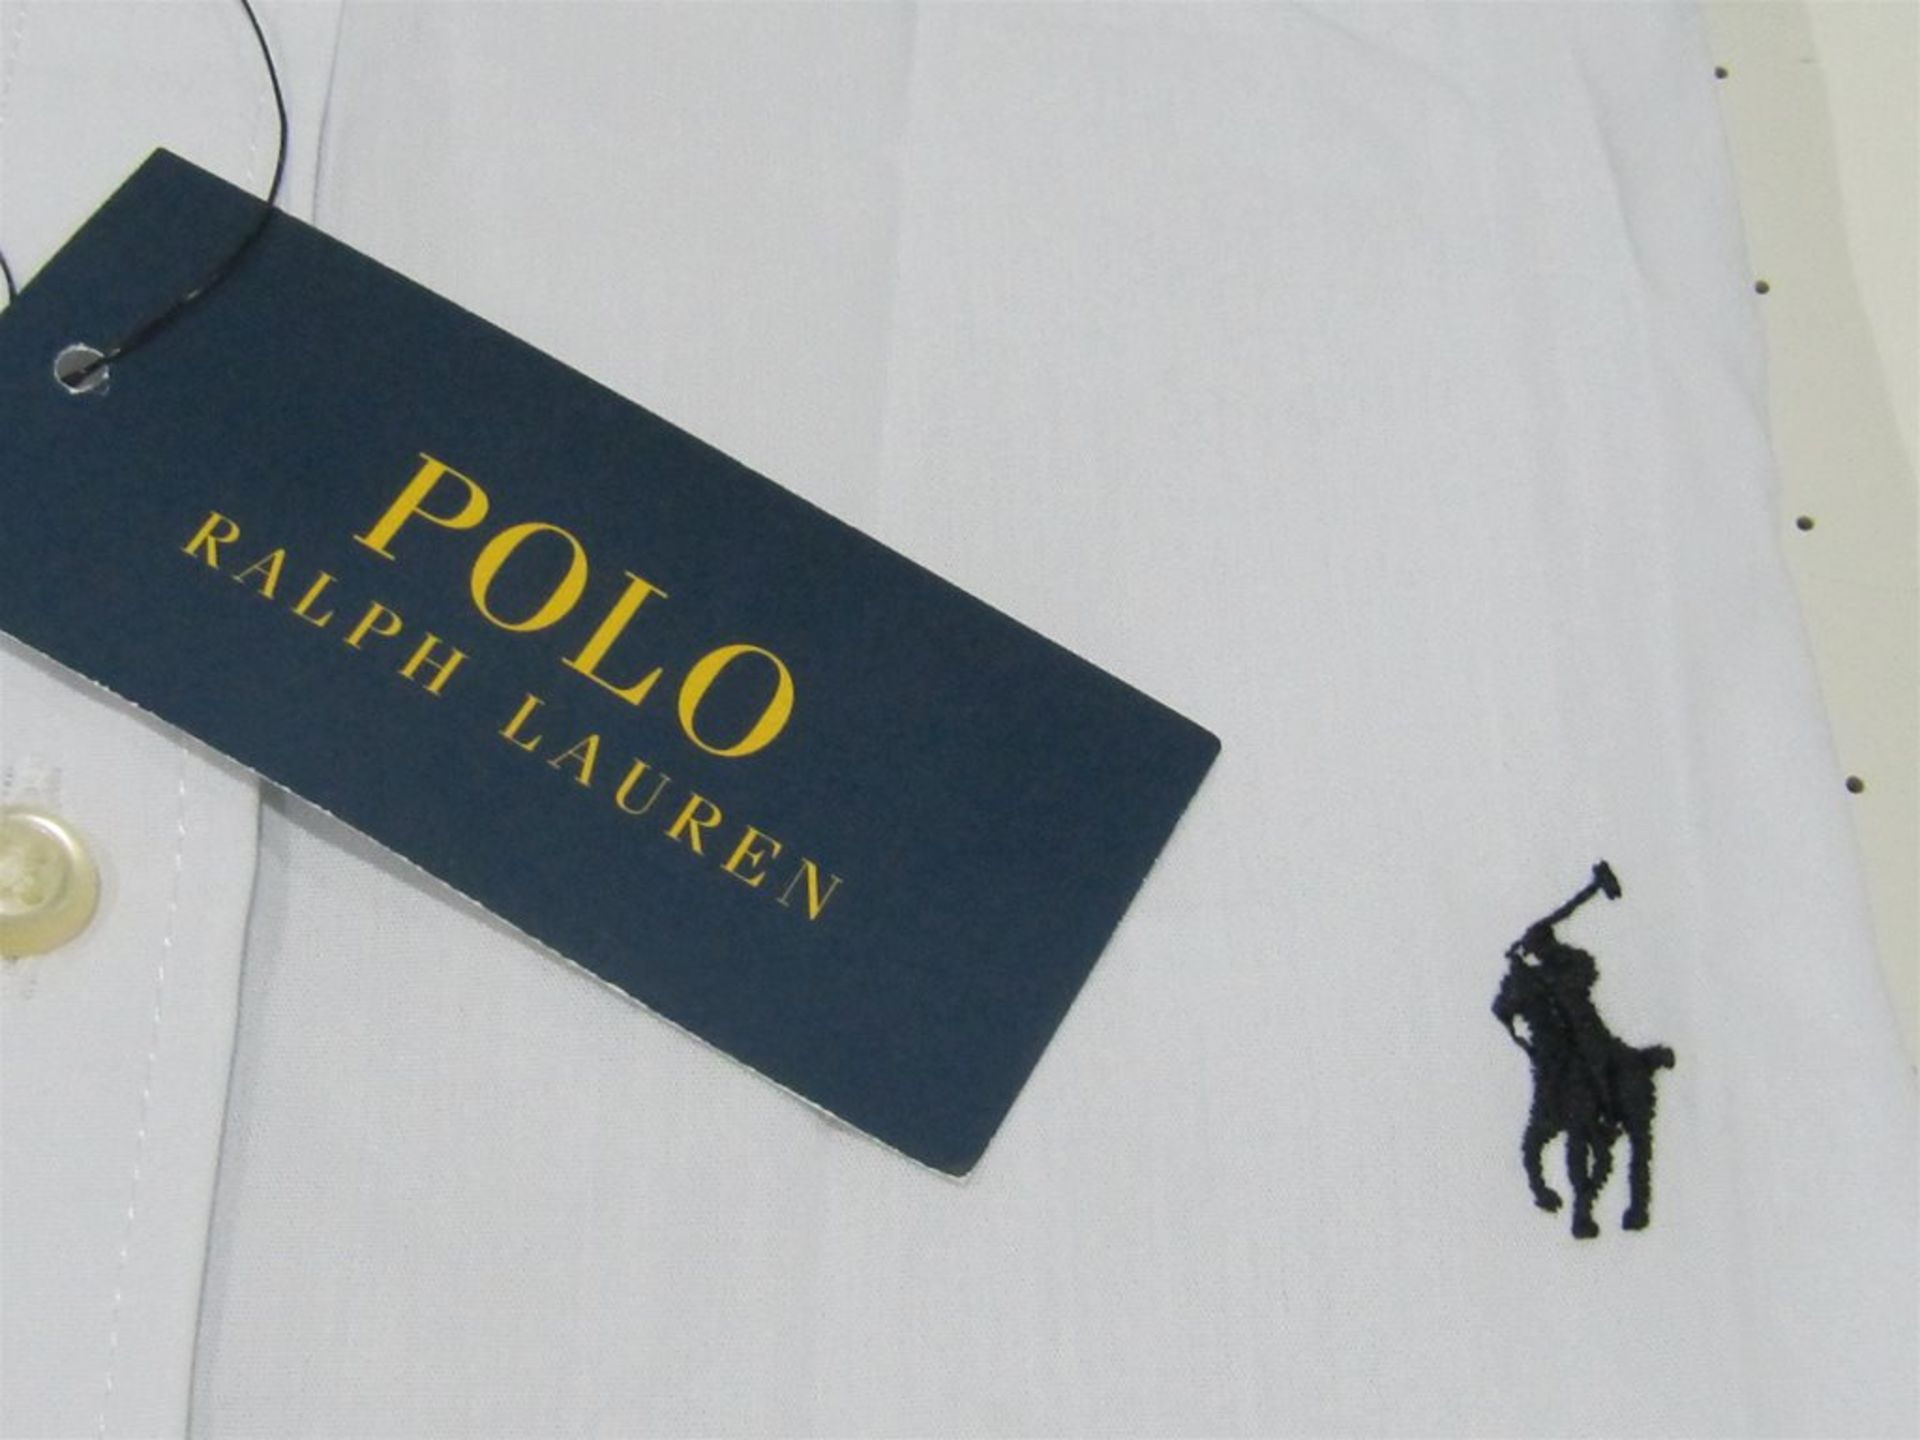 Ralph Lauren Shirt. White. Free Shipping when you Win 2 Lots or more. - Image 2 of 3